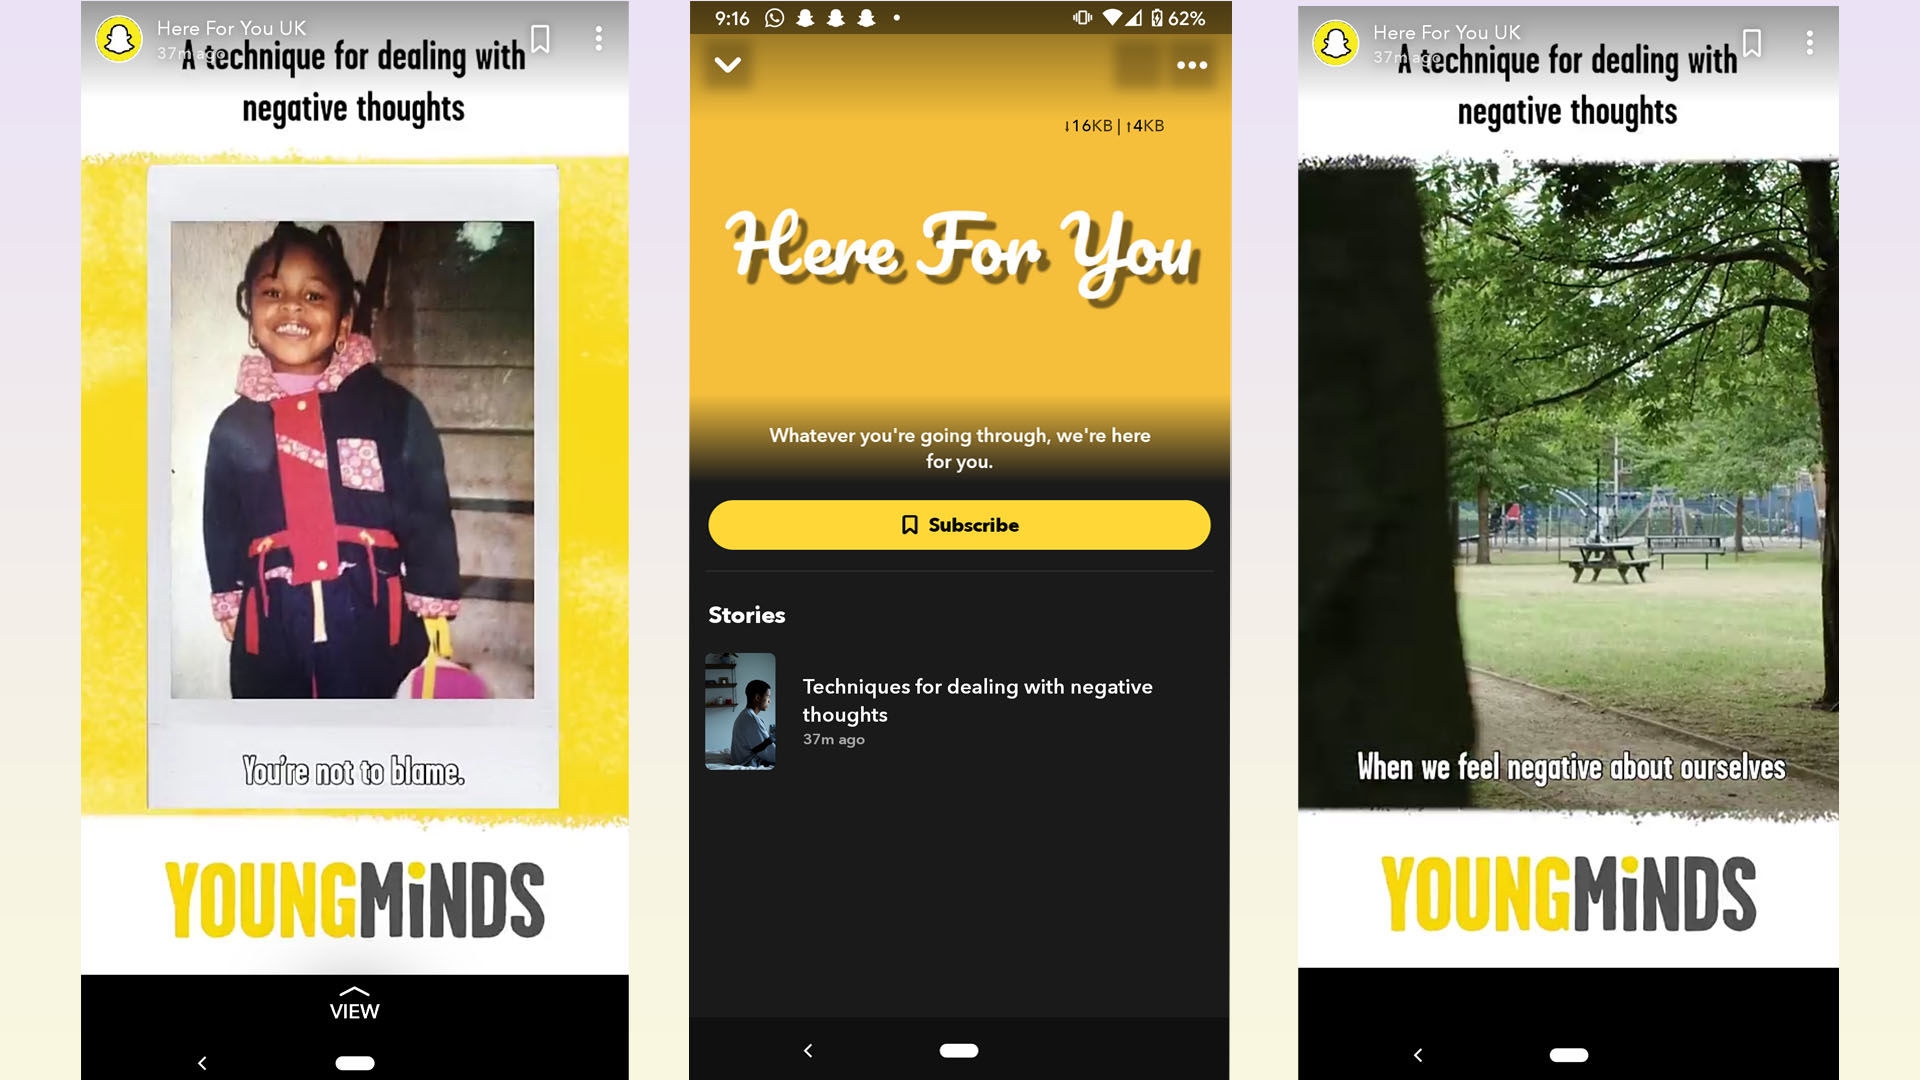 Snapchat adds mental health tools to ease coronavirus anxiety | DeviceDaily.com